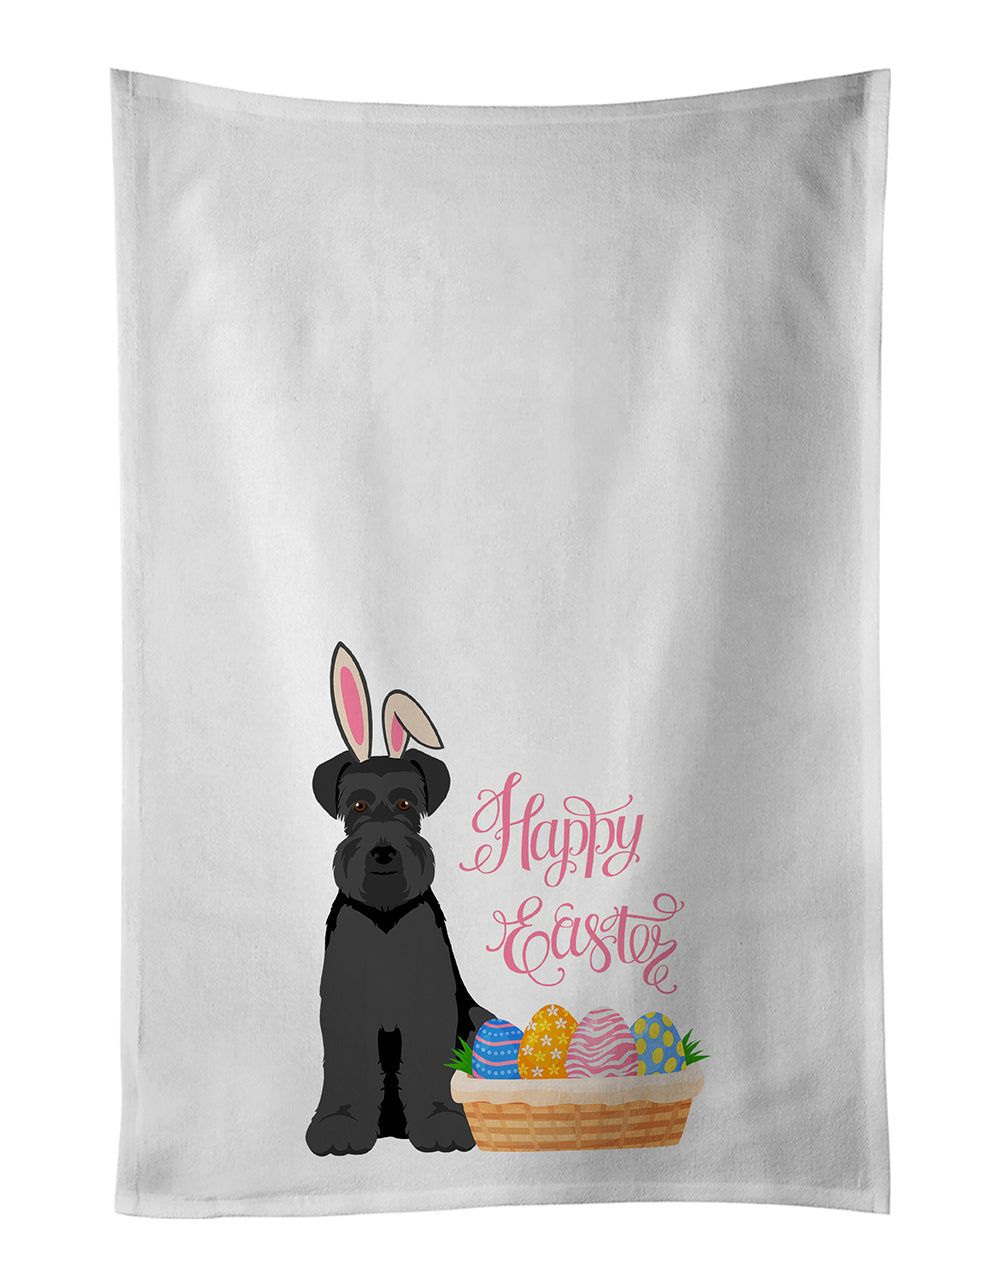 Buy this Black Natural Ears Schnauzer Easter White Kitchen Towel Set of 2 Dish Towels